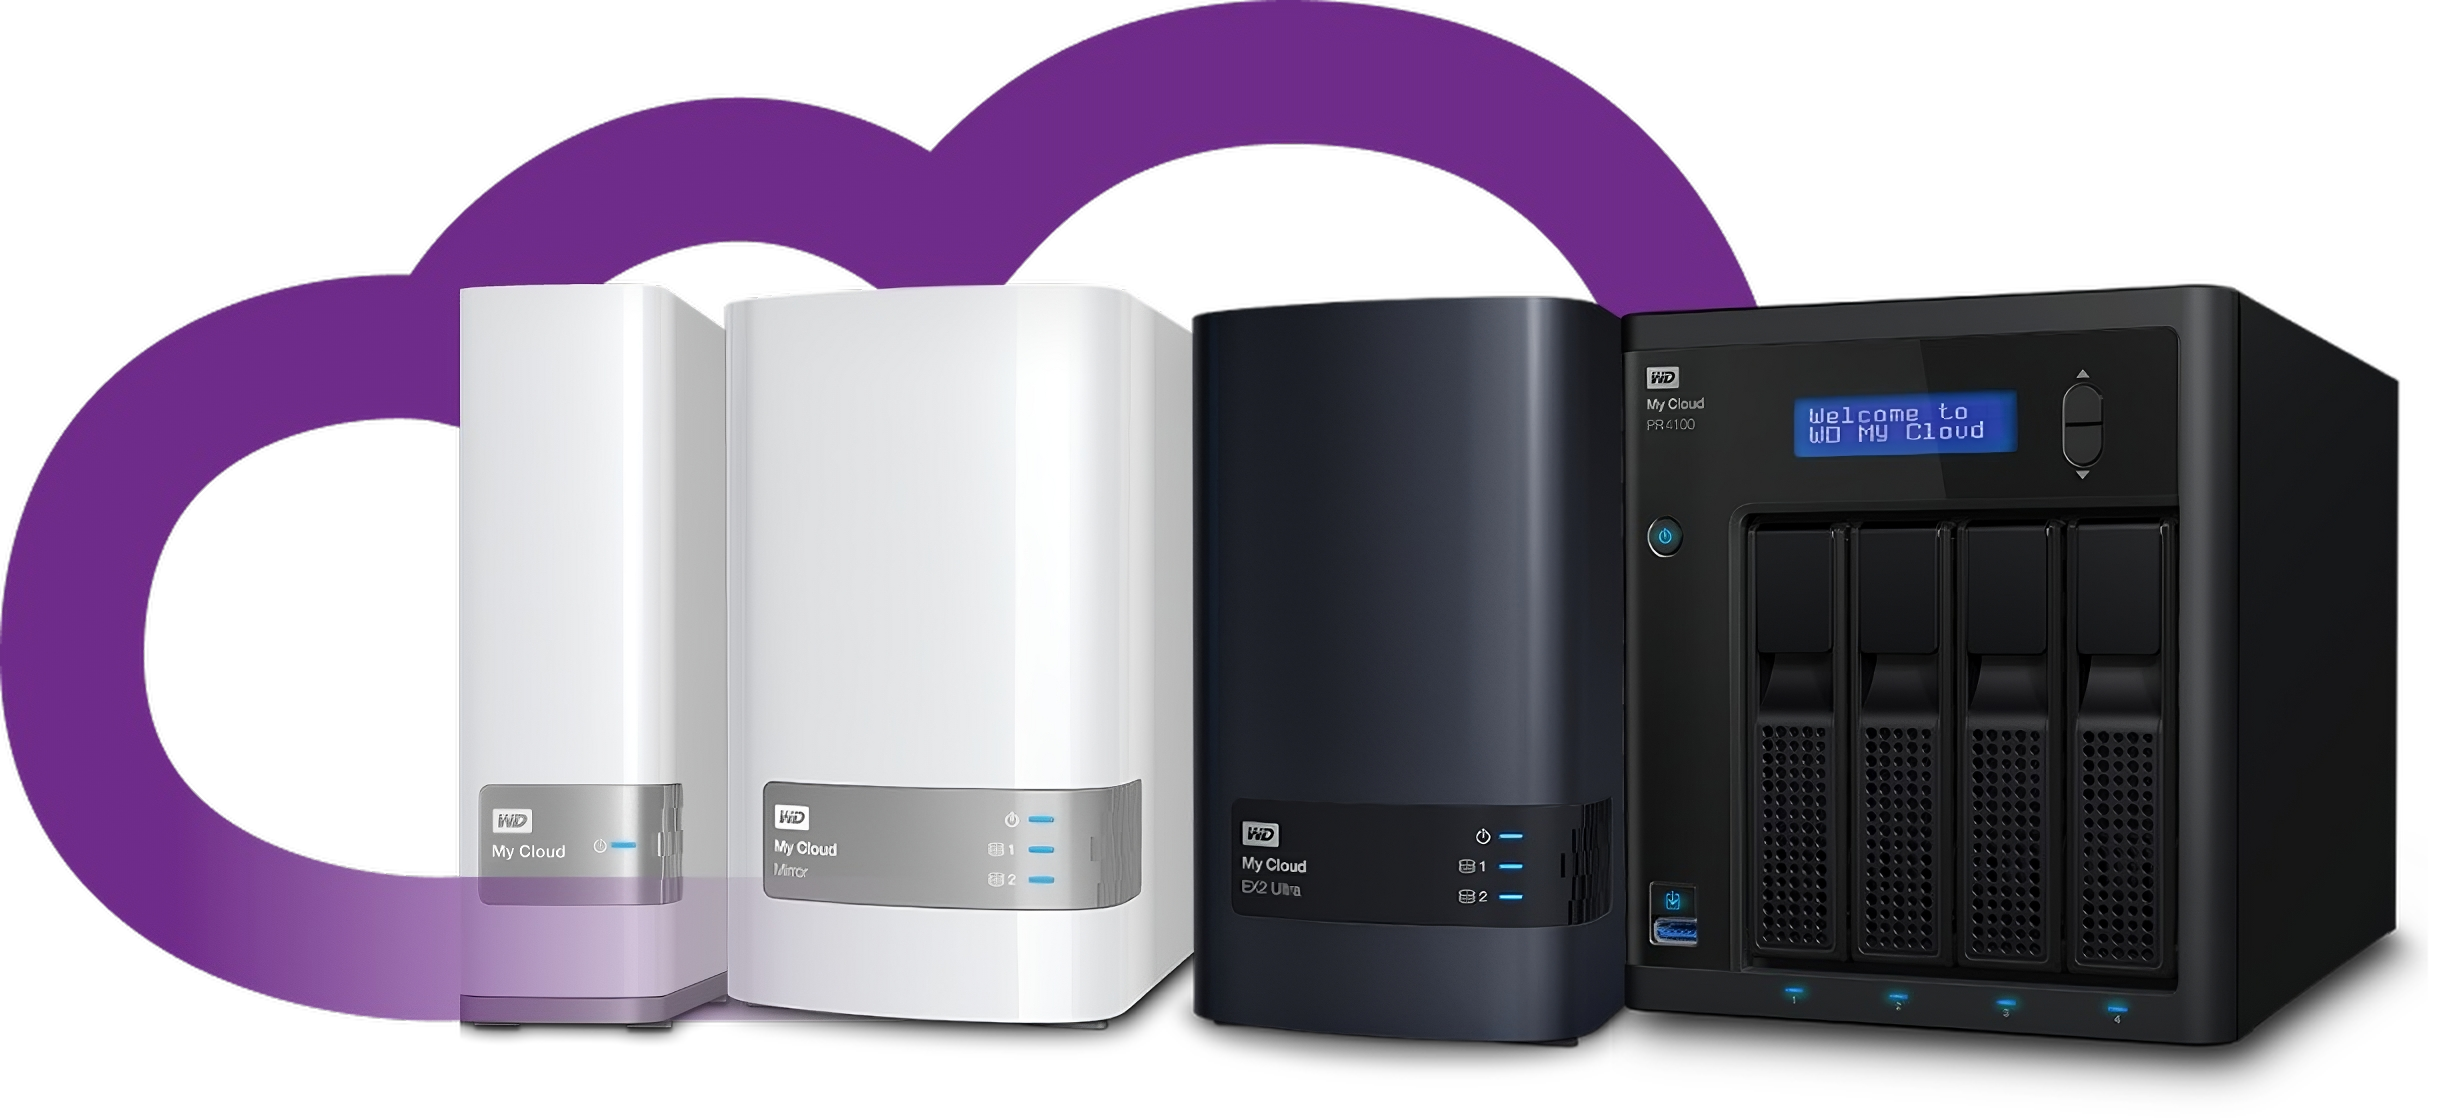 WD Products